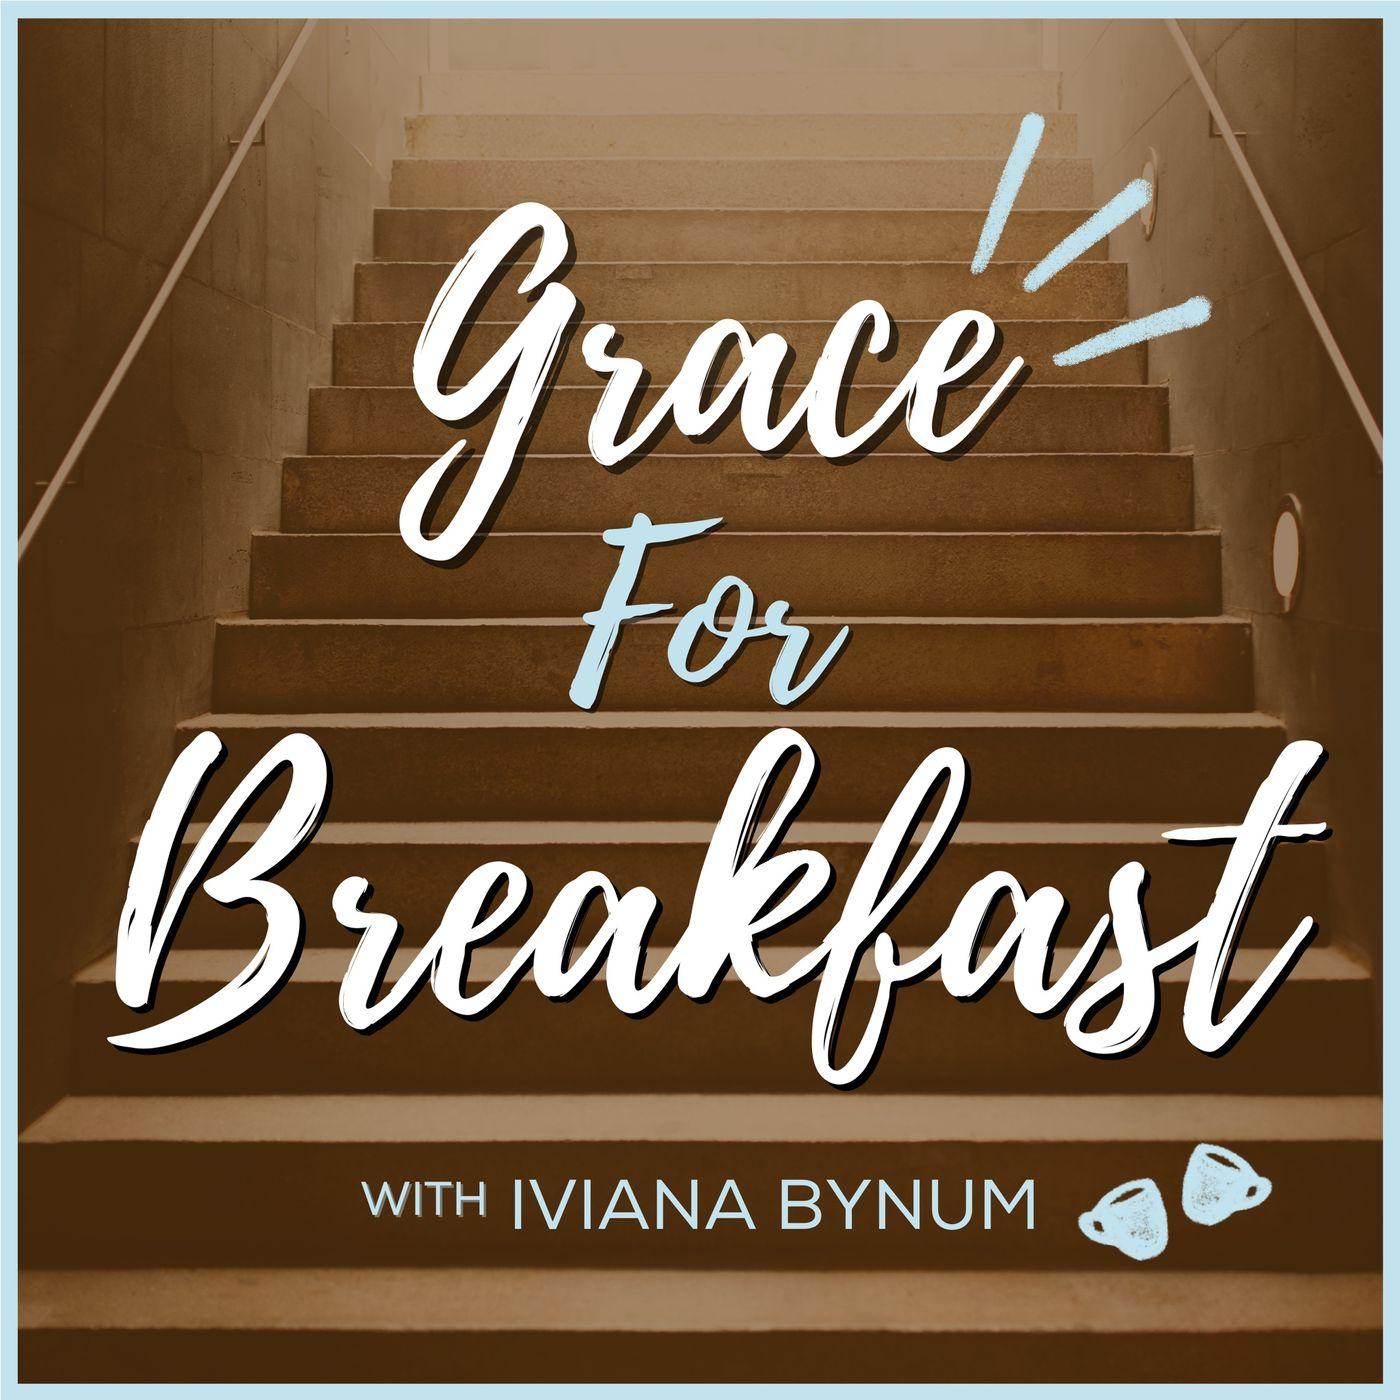 Grace for Breakfast with Iviana Bynum